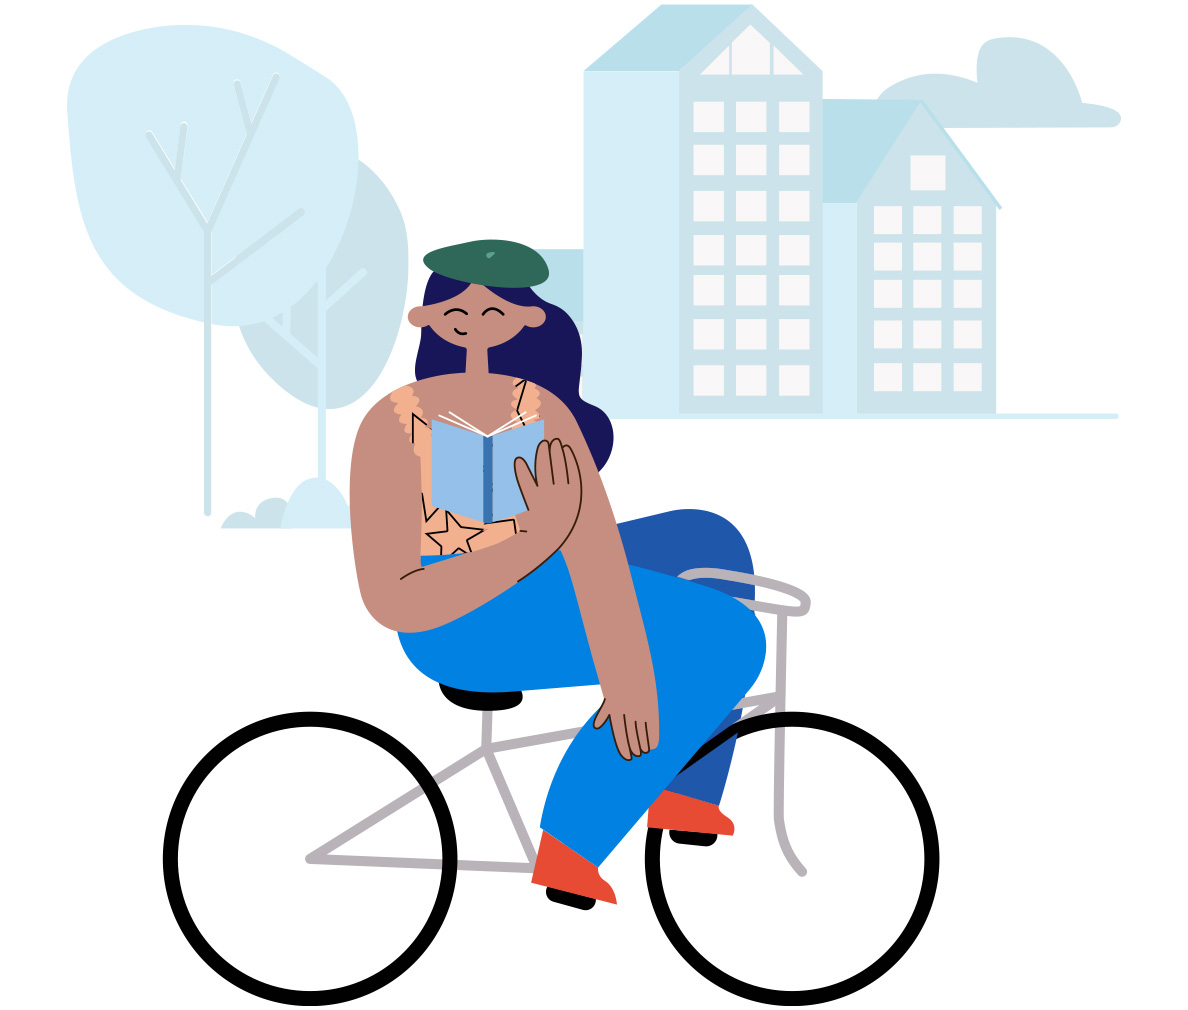 Illustration of a learner reading while sitting on bicycle